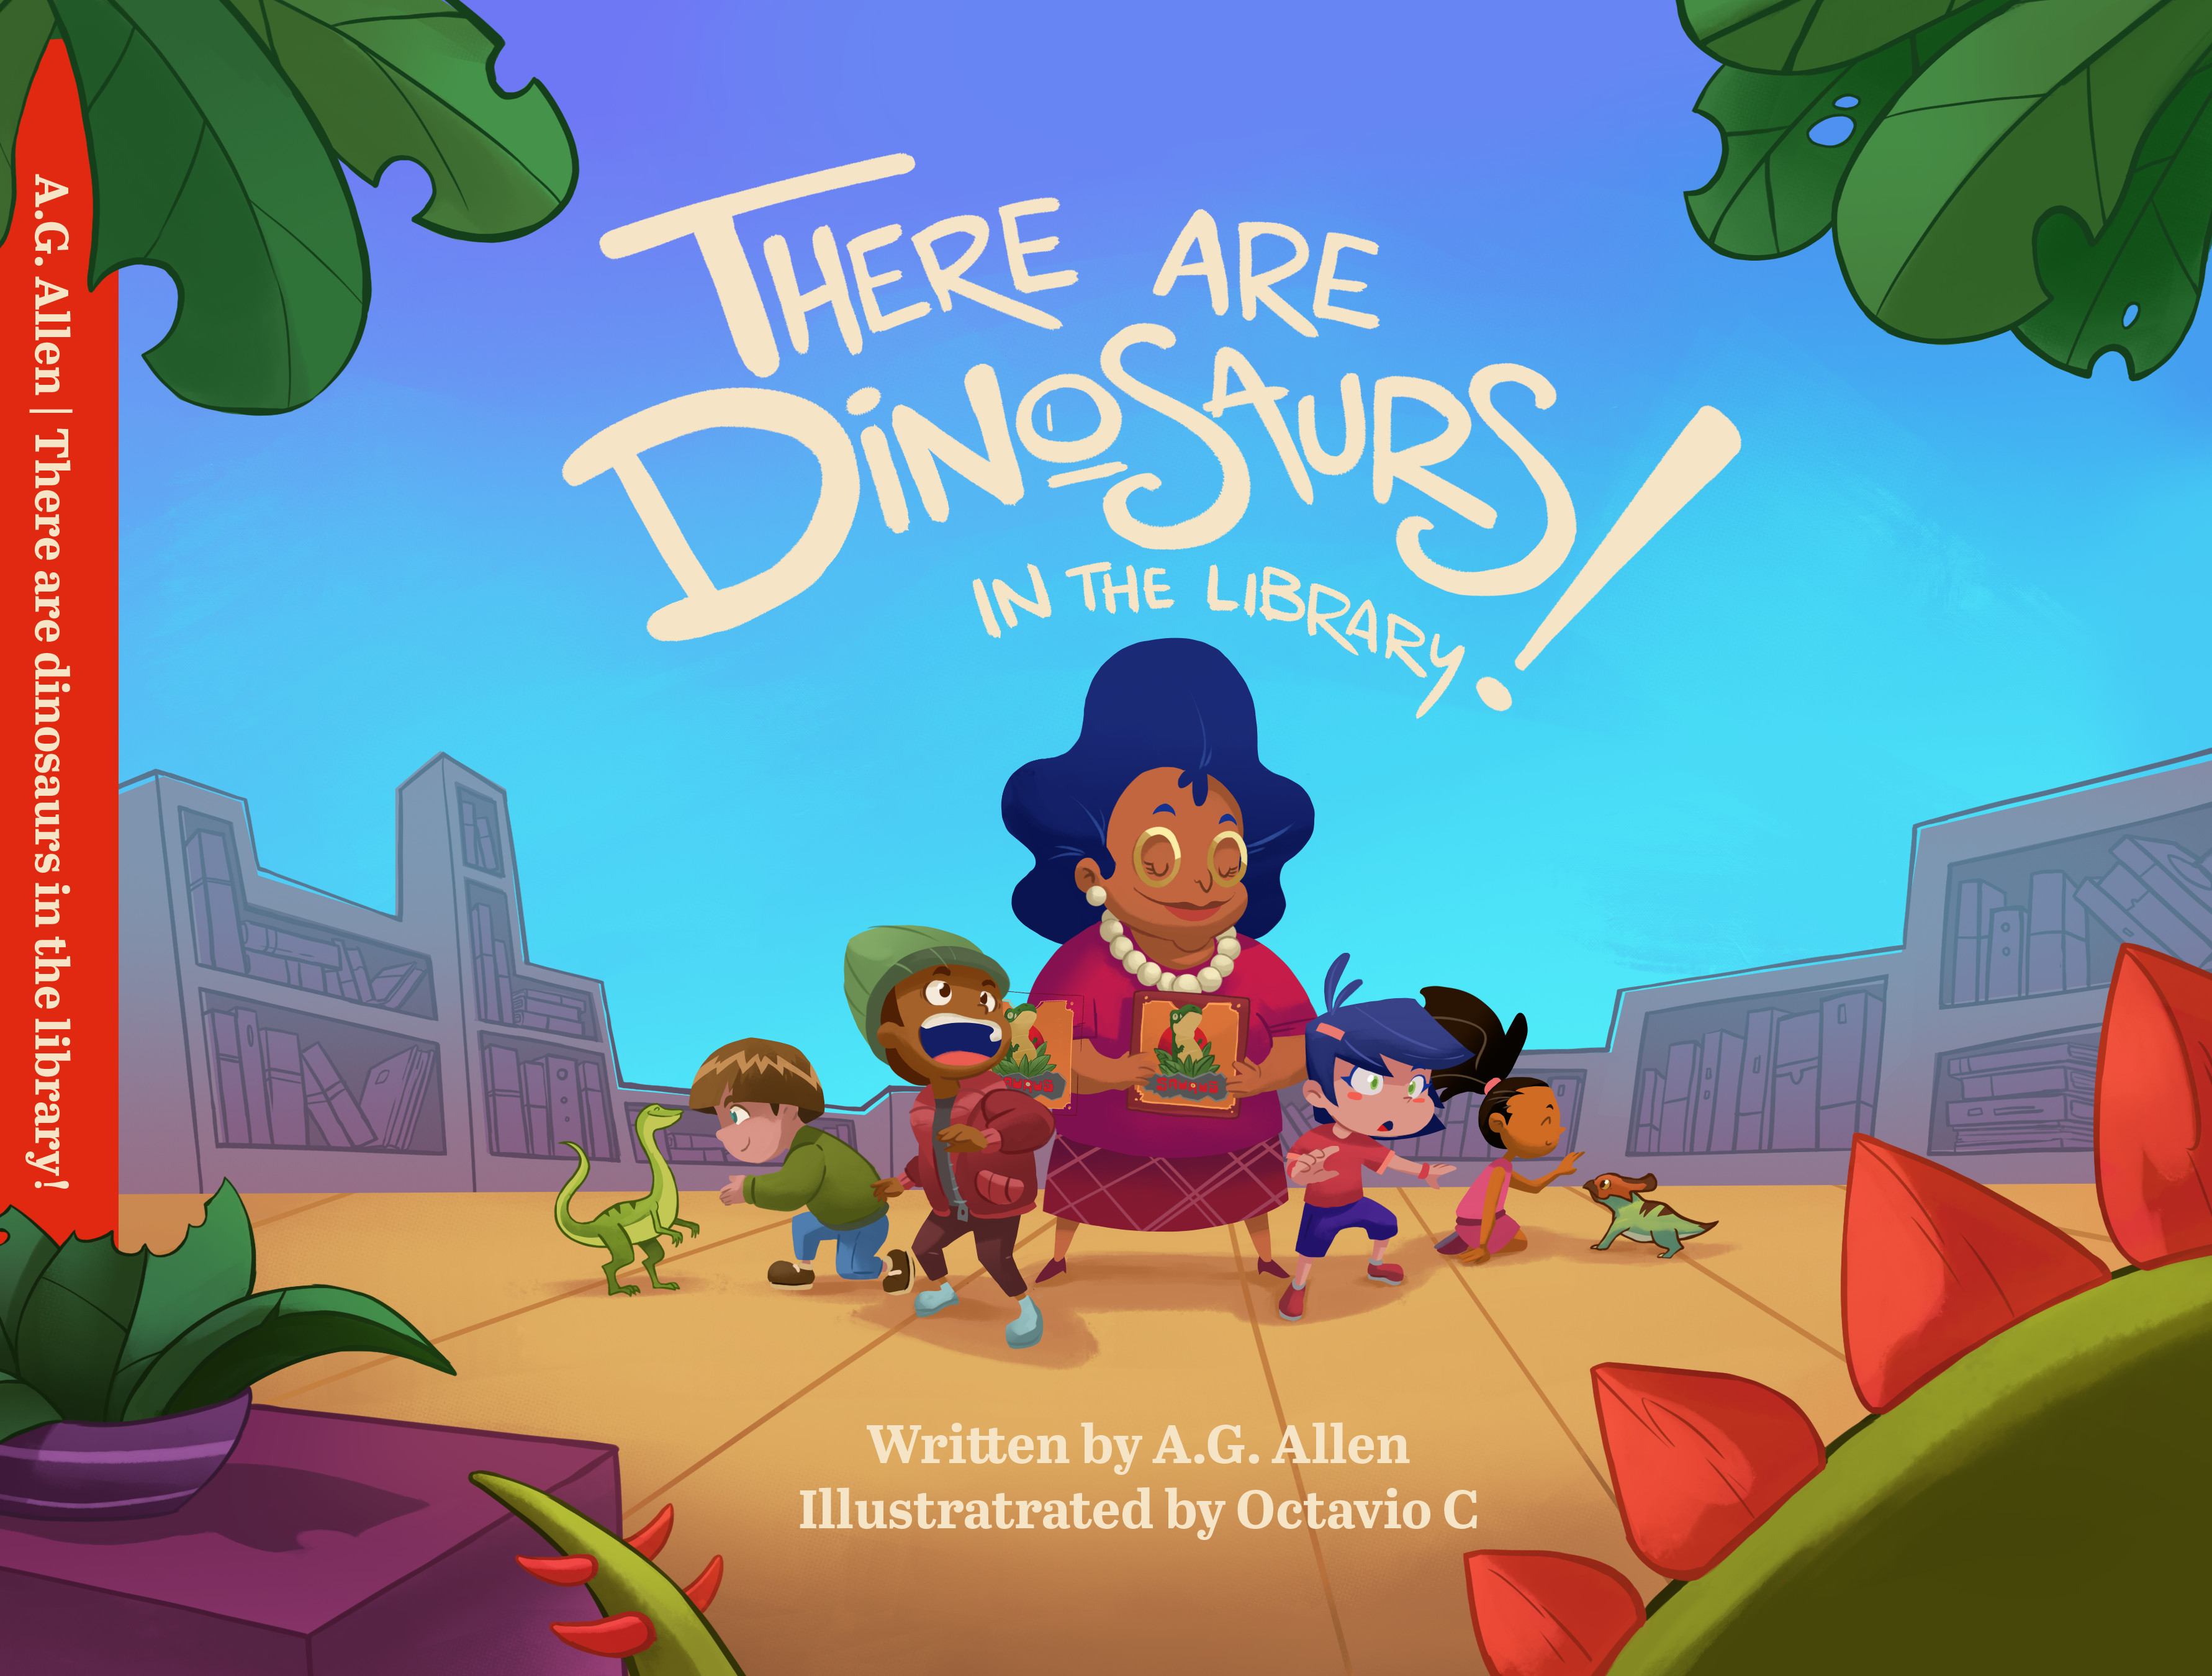 Cover for "There are Dinosaurs in the library!"